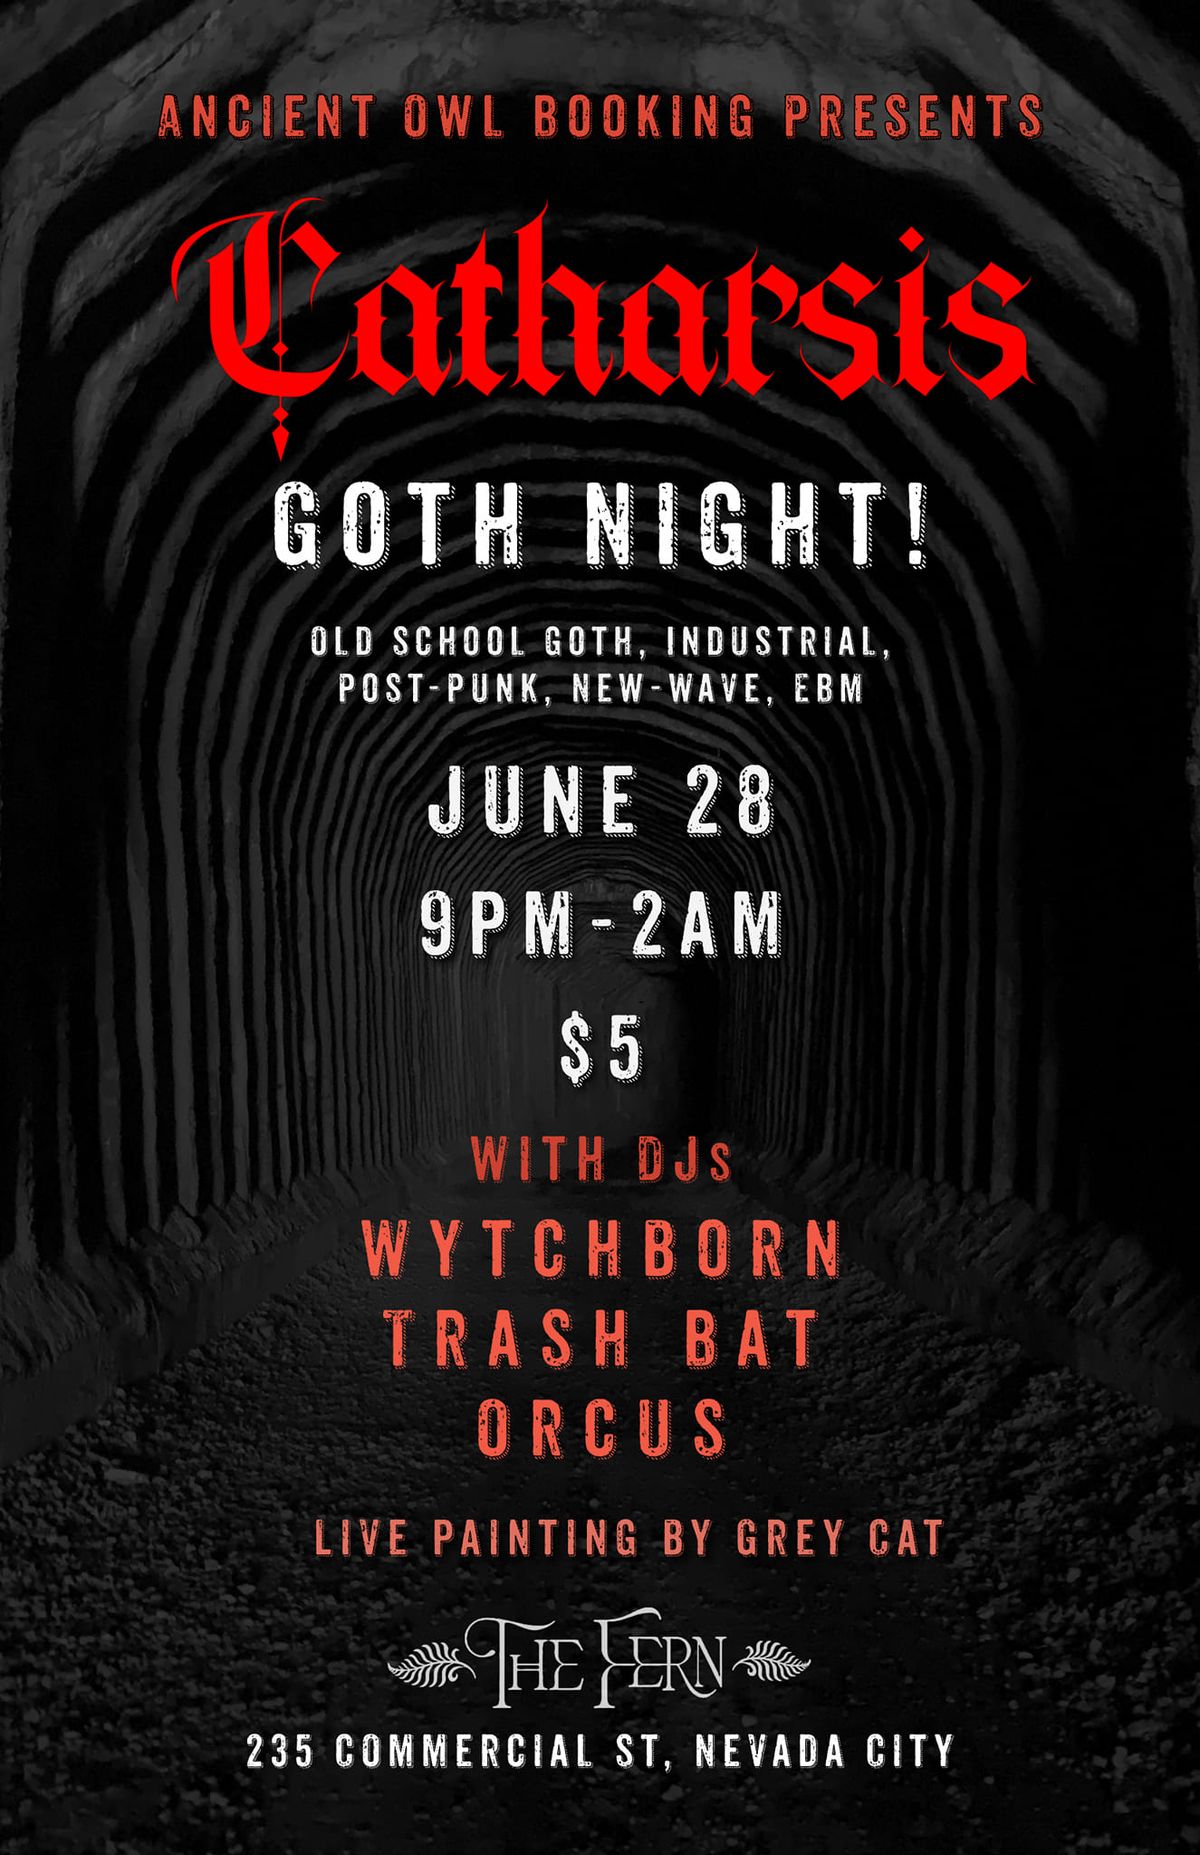 Catharsis Goth Night at The Fern!